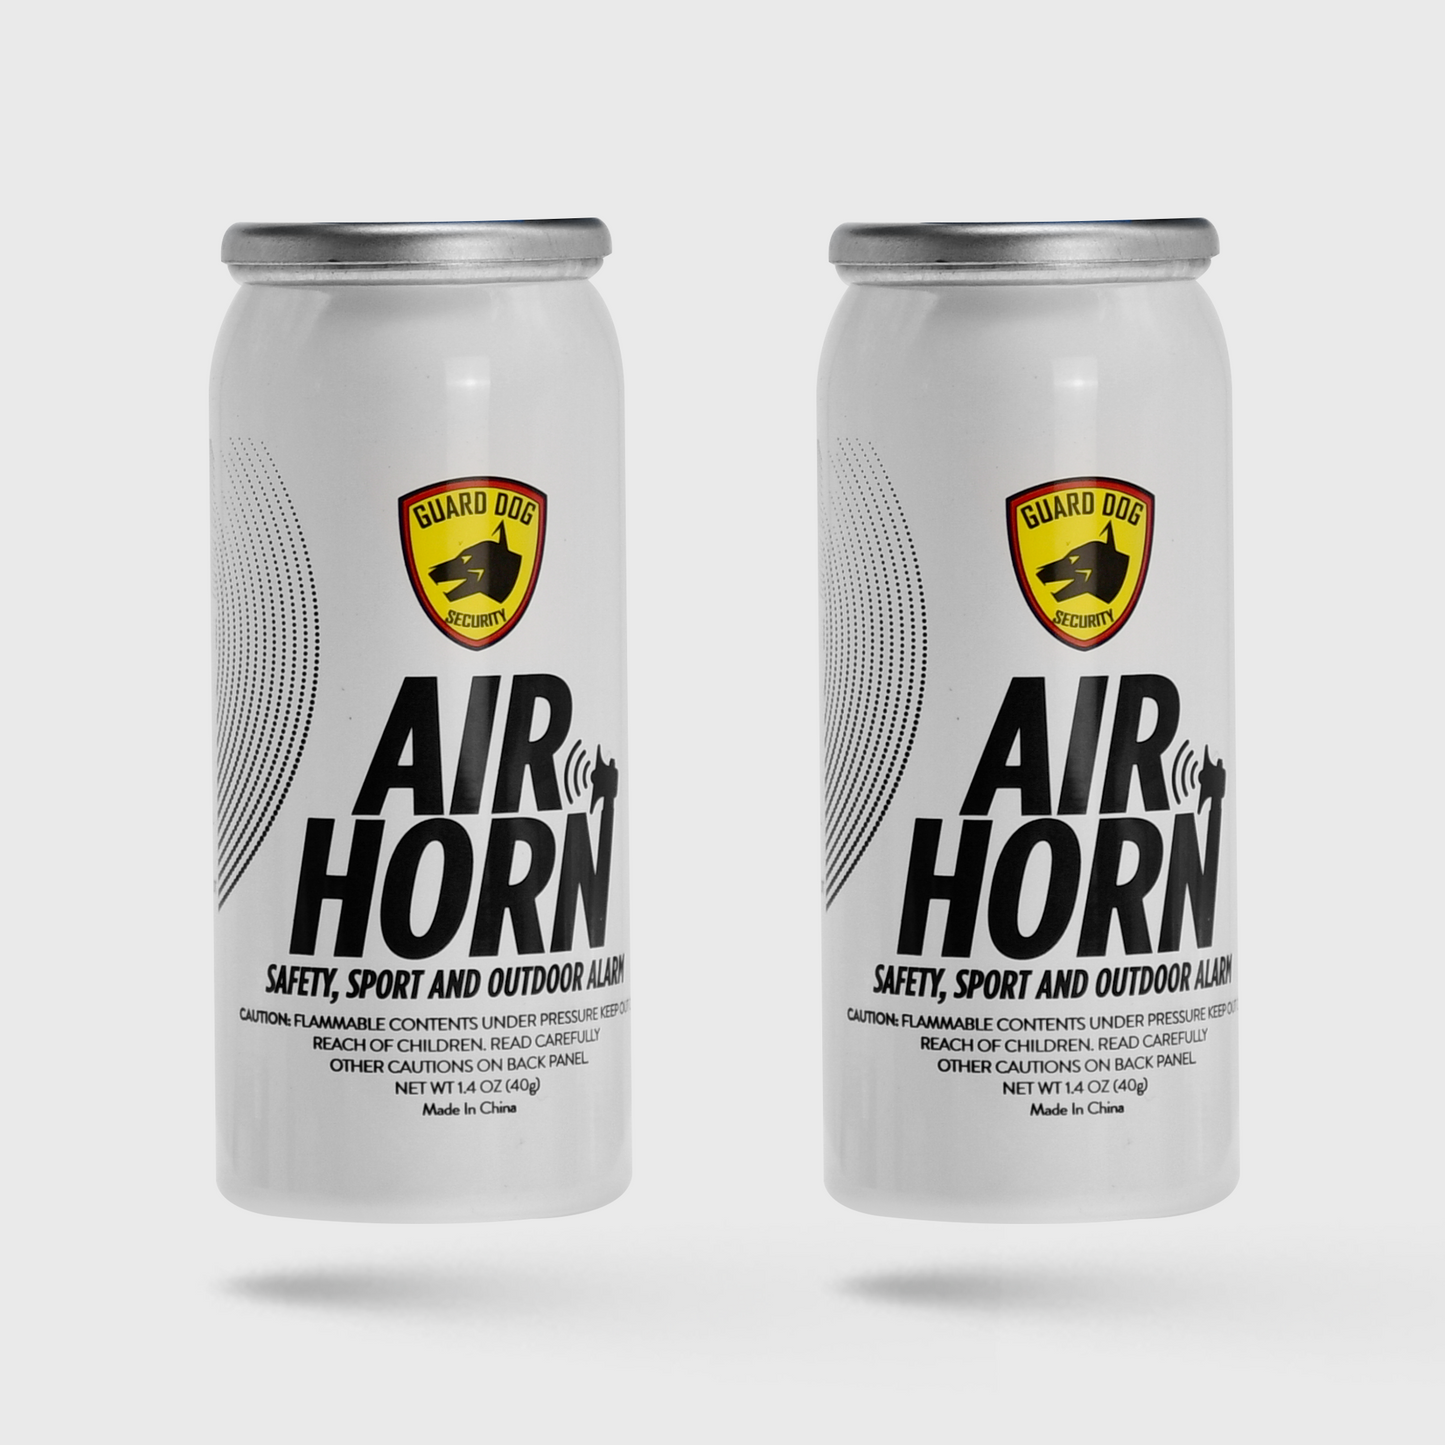 
                  
                    Air Horn 1.4 oz | 1-mile away safety and Outdoor Alarm Refills
                  
                